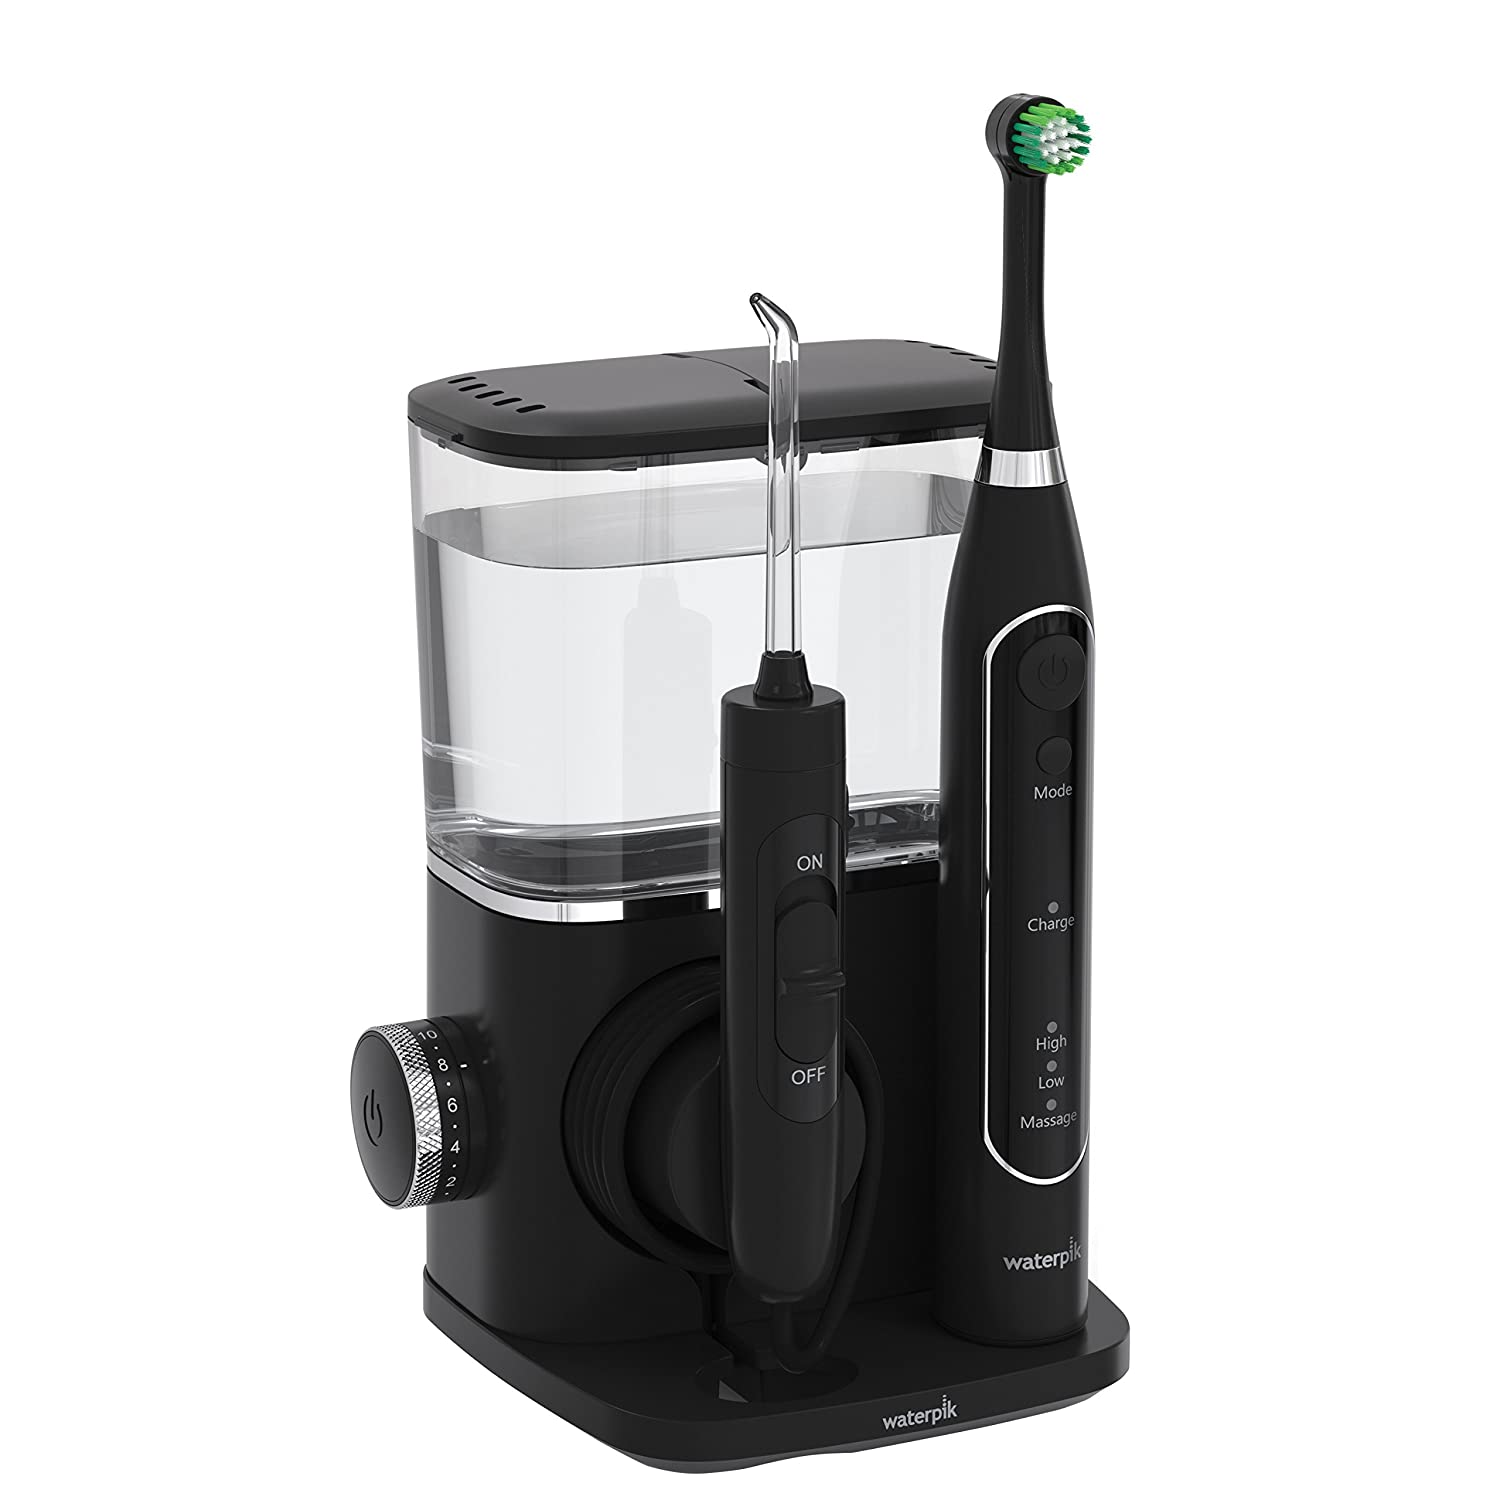 The Waterpik Sonic Fusion Toothbrush is a brush AND oral irrigator